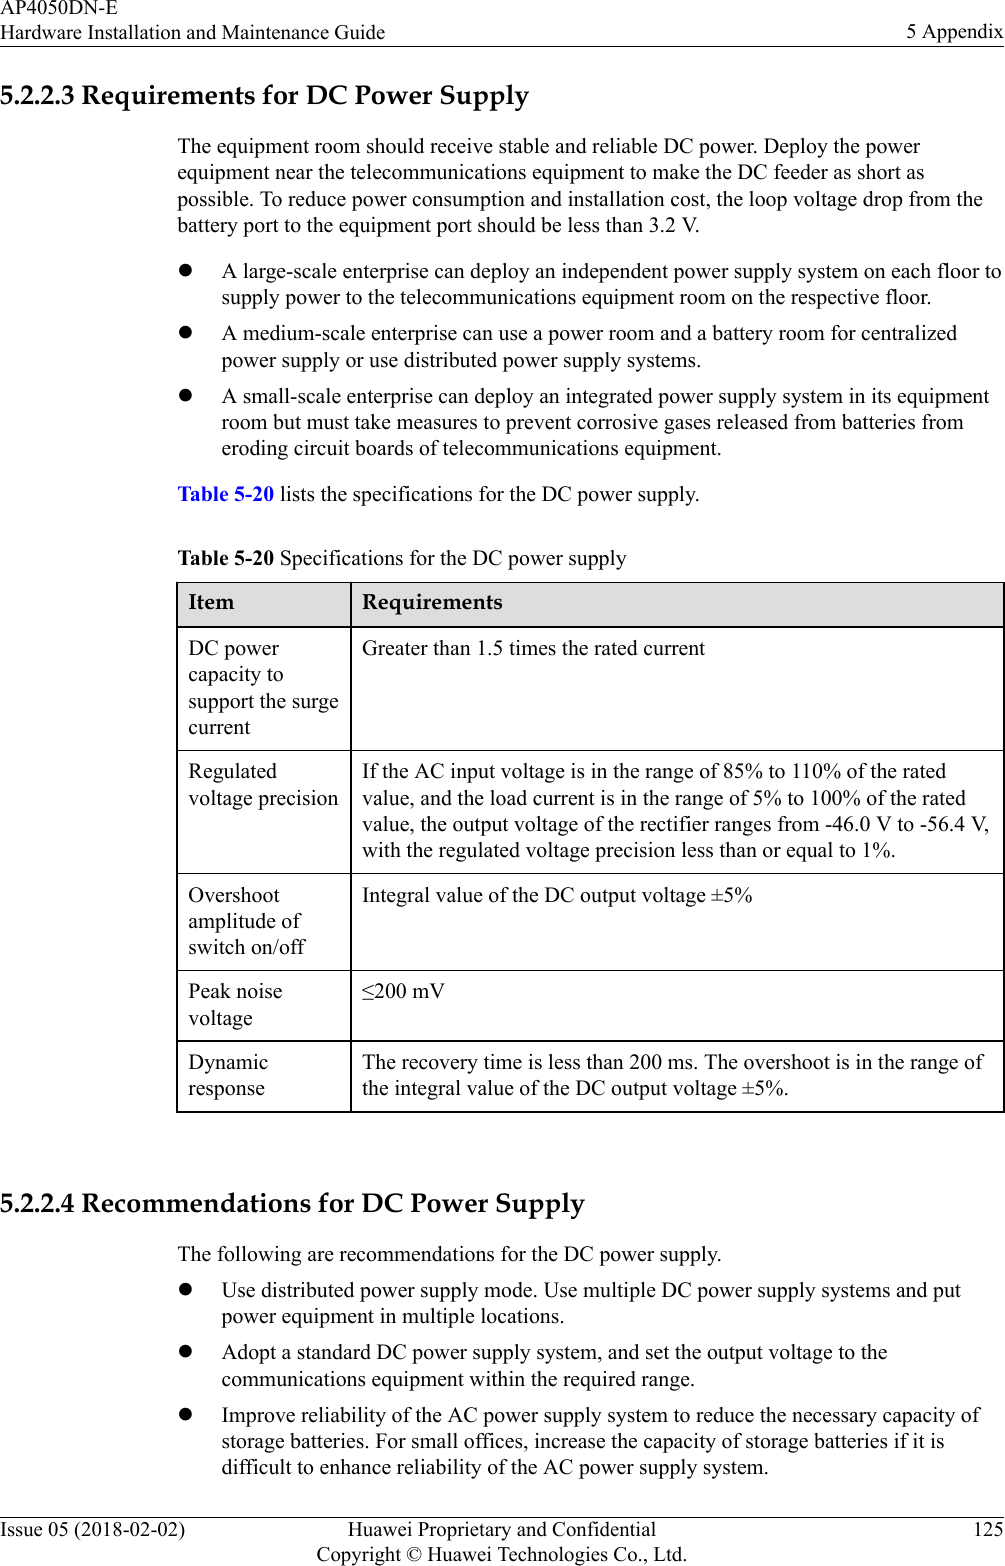 5.2.2.3 Requirements for DC Power SupplyThe equipment room should receive stable and reliable DC power. Deploy the powerequipment near the telecommunications equipment to make the DC feeder as short aspossible. To reduce power consumption and installation cost, the loop voltage drop from thebattery port to the equipment port should be less than 3.2 V.lA large-scale enterprise can deploy an independent power supply system on each floor tosupply power to the telecommunications equipment room on the respective floor.lA medium-scale enterprise can use a power room and a battery room for centralizedpower supply or use distributed power supply systems.lA small-scale enterprise can deploy an integrated power supply system in its equipmentroom but must take measures to prevent corrosive gases released from batteries fromeroding circuit boards of telecommunications equipment.Table 5-20 lists the specifications for the DC power supply.Table 5-20 Specifications for the DC power supplyItem RequirementsDC powercapacity tosupport the surgecurrentGreater than 1.5 times the rated currentRegulatedvoltage precisionIf the AC input voltage is in the range of 85% to 110% of the ratedvalue, and the load current is in the range of 5% to 100% of the ratedvalue, the output voltage of the rectifier ranges from -46.0 V to -56.4 V,with the regulated voltage precision less than or equal to 1%.Overshootamplitude ofswitch on/offIntegral value of the DC output voltage ±5%Peak noisevoltage≤200 mVDynamicresponseThe recovery time is less than 200 ms. The overshoot is in the range ofthe integral value of the DC output voltage ±5%. 5.2.2.4 Recommendations for DC Power SupplyThe following are recommendations for the DC power supply.lUse distributed power supply mode. Use multiple DC power supply systems and putpower equipment in multiple locations.lAdopt a standard DC power supply system, and set the output voltage to thecommunications equipment within the required range.lImprove reliability of the AC power supply system to reduce the necessary capacity ofstorage batteries. For small offices, increase the capacity of storage batteries if it isdifficult to enhance reliability of the AC power supply system.AP4050DN-EHardware Installation and Maintenance Guide 5 AppendixIssue 05 (2018-02-02) Huawei Proprietary and ConfidentialCopyright © Huawei Technologies Co., Ltd.125